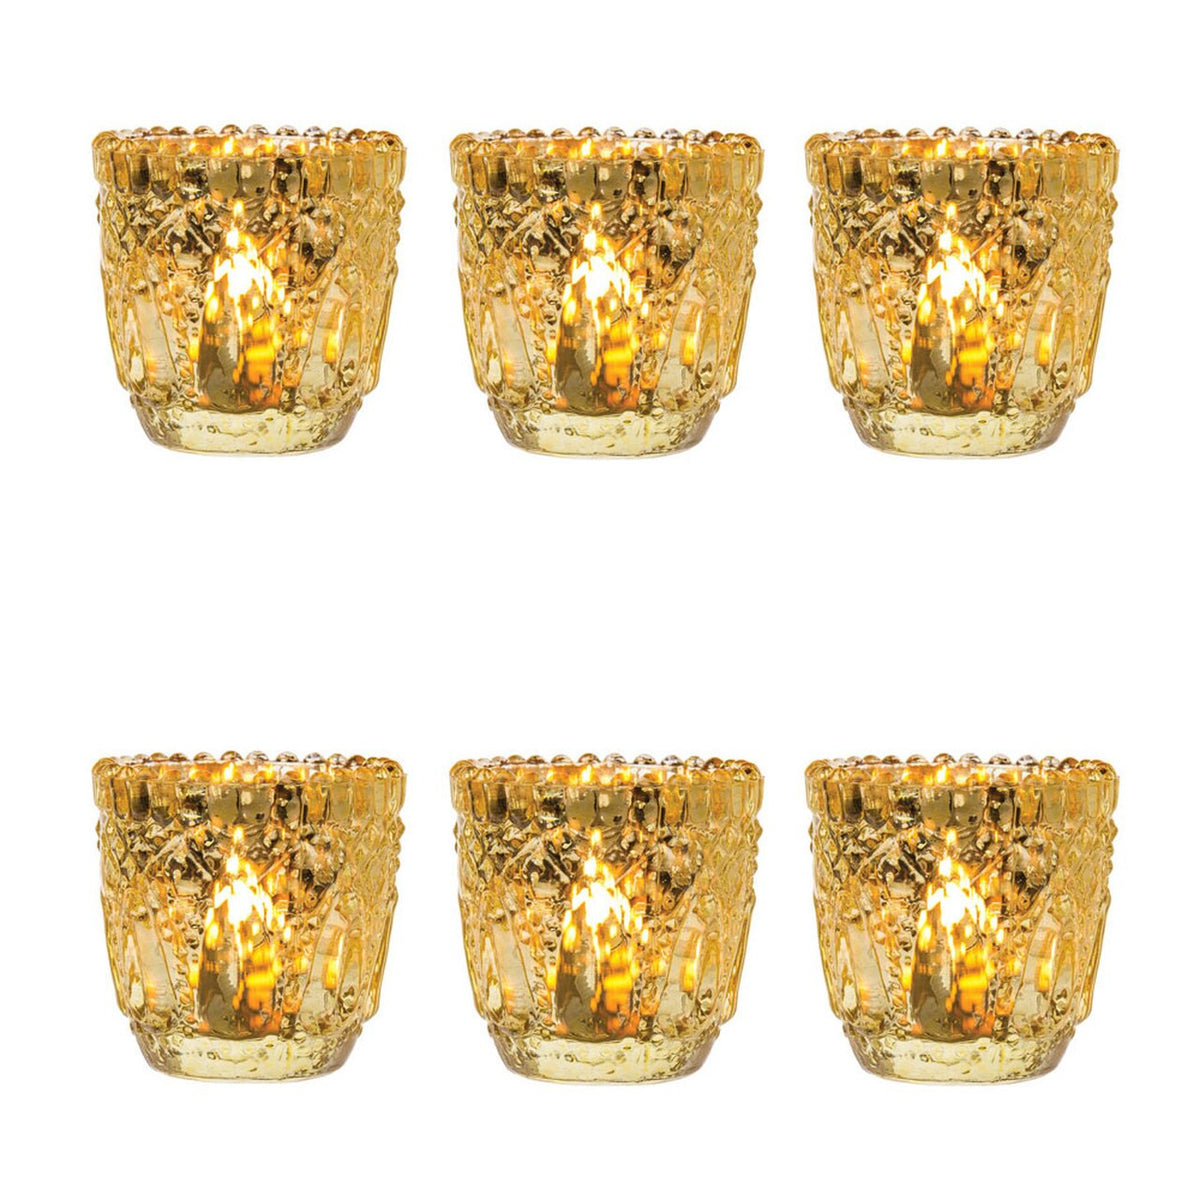 6 Pack | Faceted Vintage Mercury Glass Candle Holders (2.75-Inch, Lillian Design, Gold) - Use with Tea Lights - For Home Decor, Parties and Wedding Decorations - PaperLanternStore.com - Paper Lanterns, Decor, Party Lights &amp; More